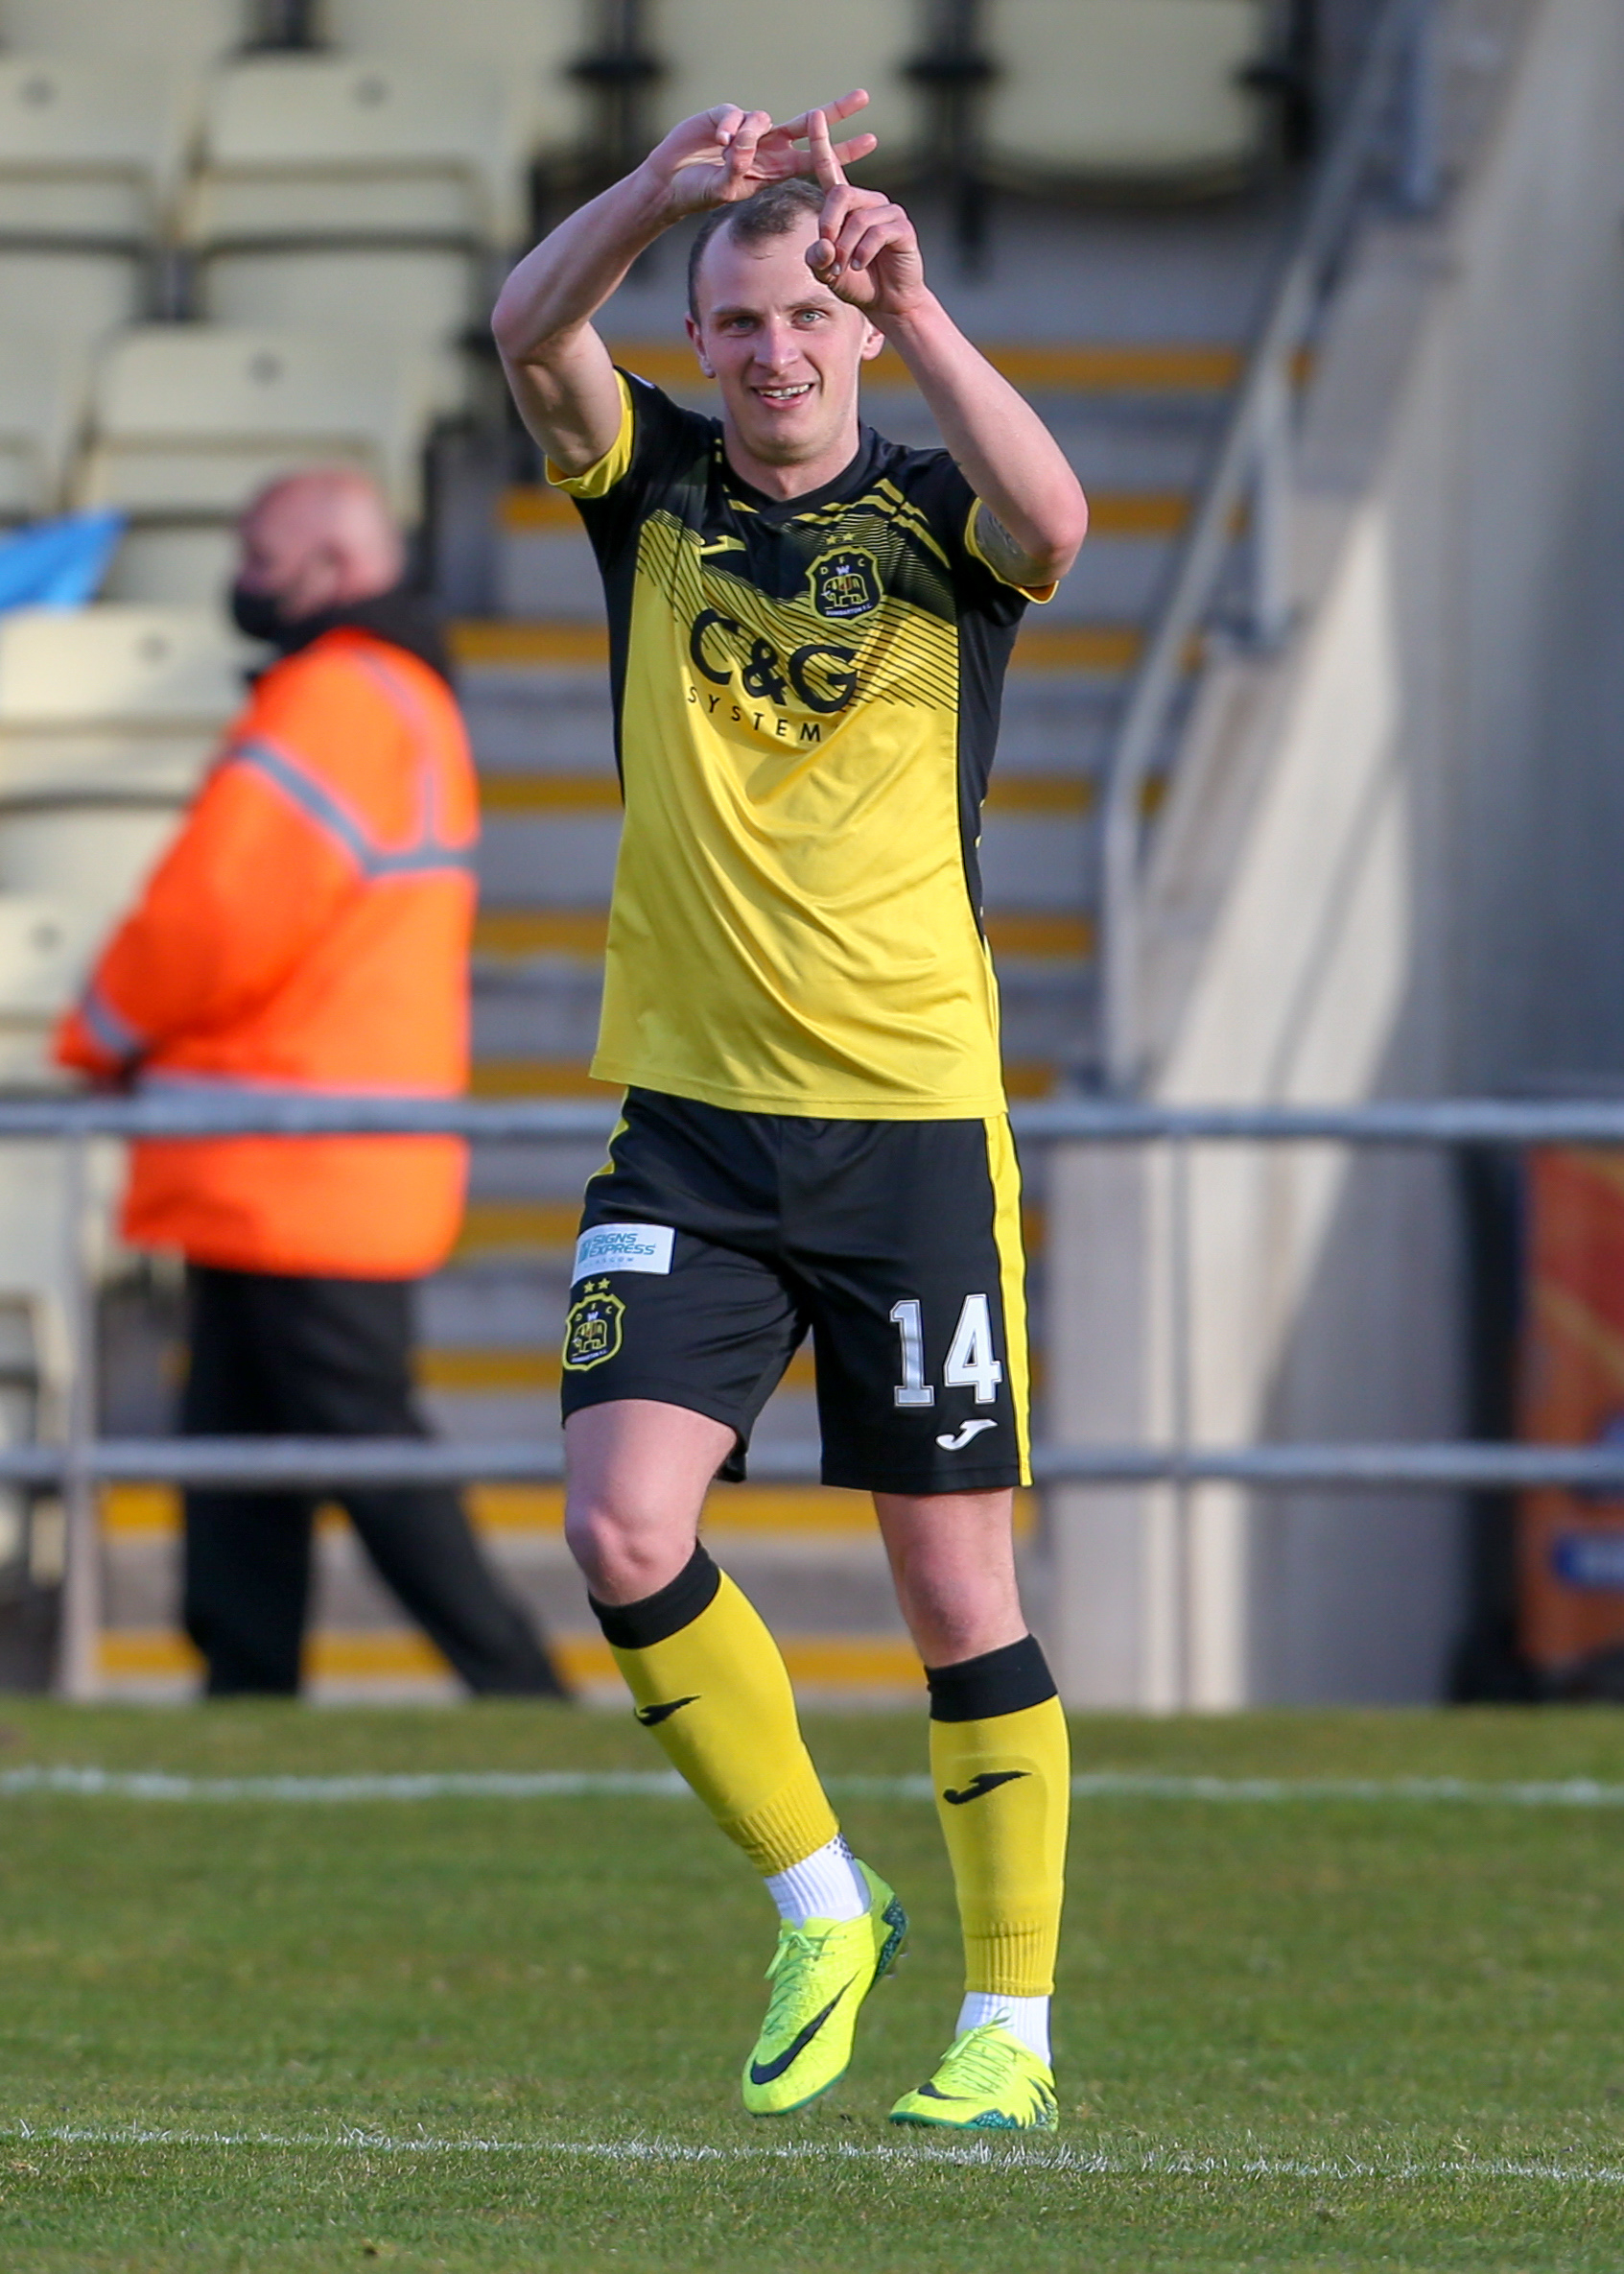 Dumbarton threw themselves a League One lifeline with a dramatic 3-2 win at home to Peterhead (Photo - Andy Scott)